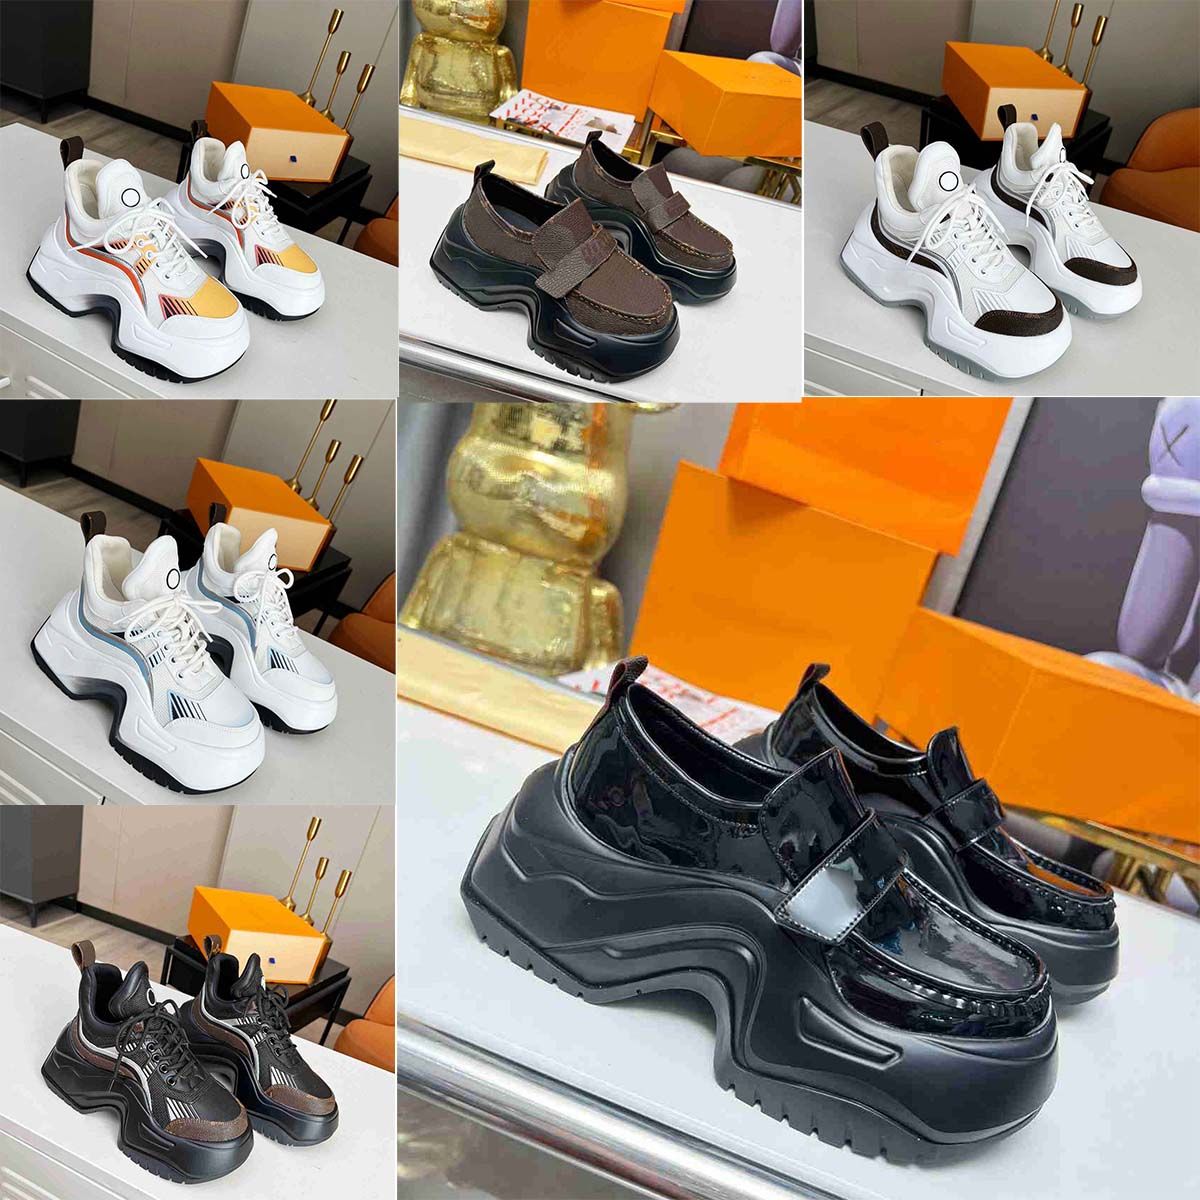 Designer Casual Shoes ARCHLIGHT 2.0 PLATFORM Sneakers Capsule Series Shoes  Lates P Cloudbust Trainers Rubber Platform Sneakers From Basketballstore,  $106.95